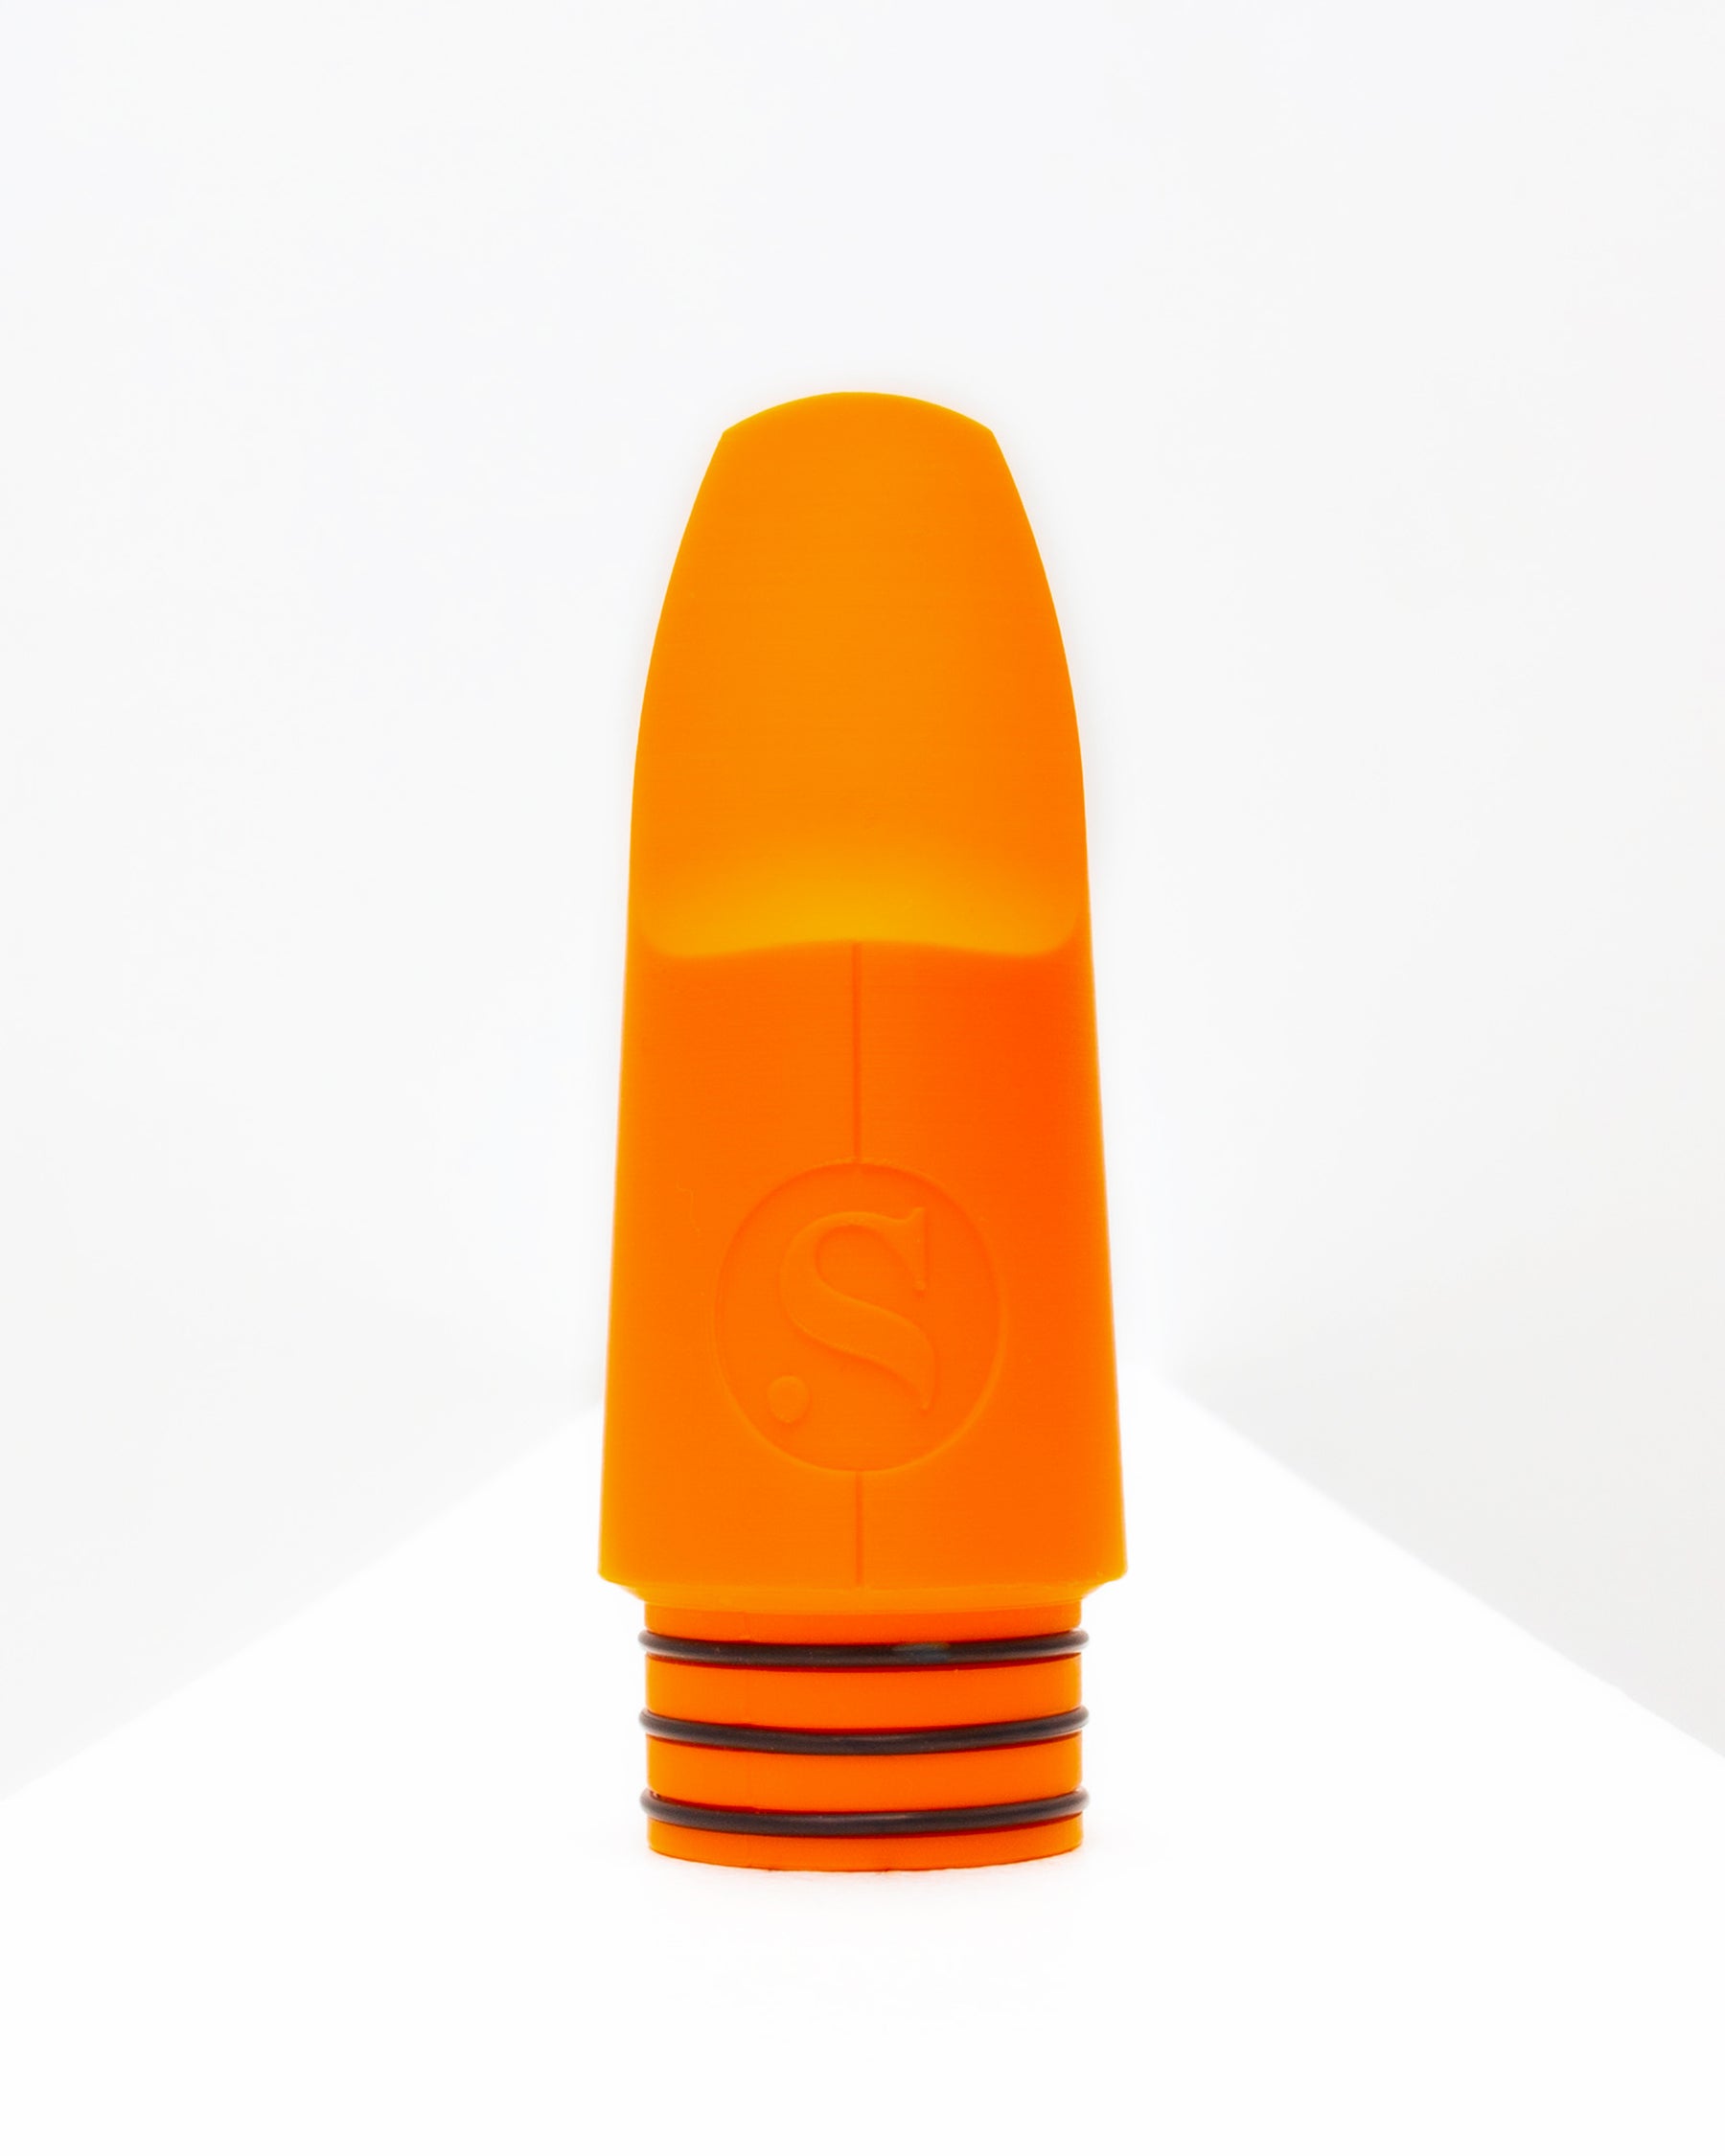 Bass Signature Clarinet mouthpiece - Todd Marcus by Syos - Lava Orange